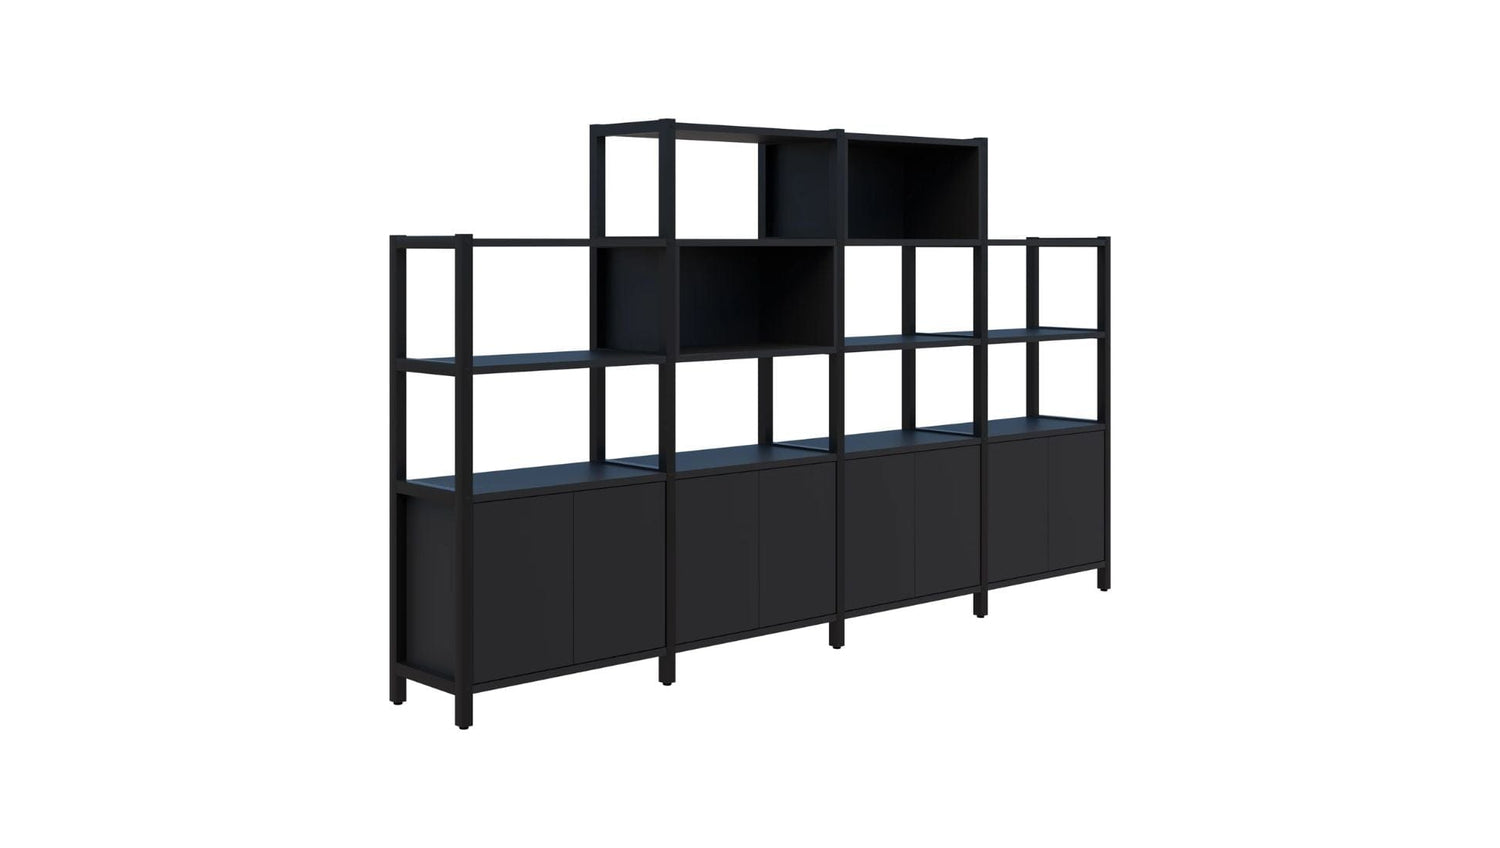 Filing and Storage Open Display Wall - 4 - 5 Tier Grid 40 Range